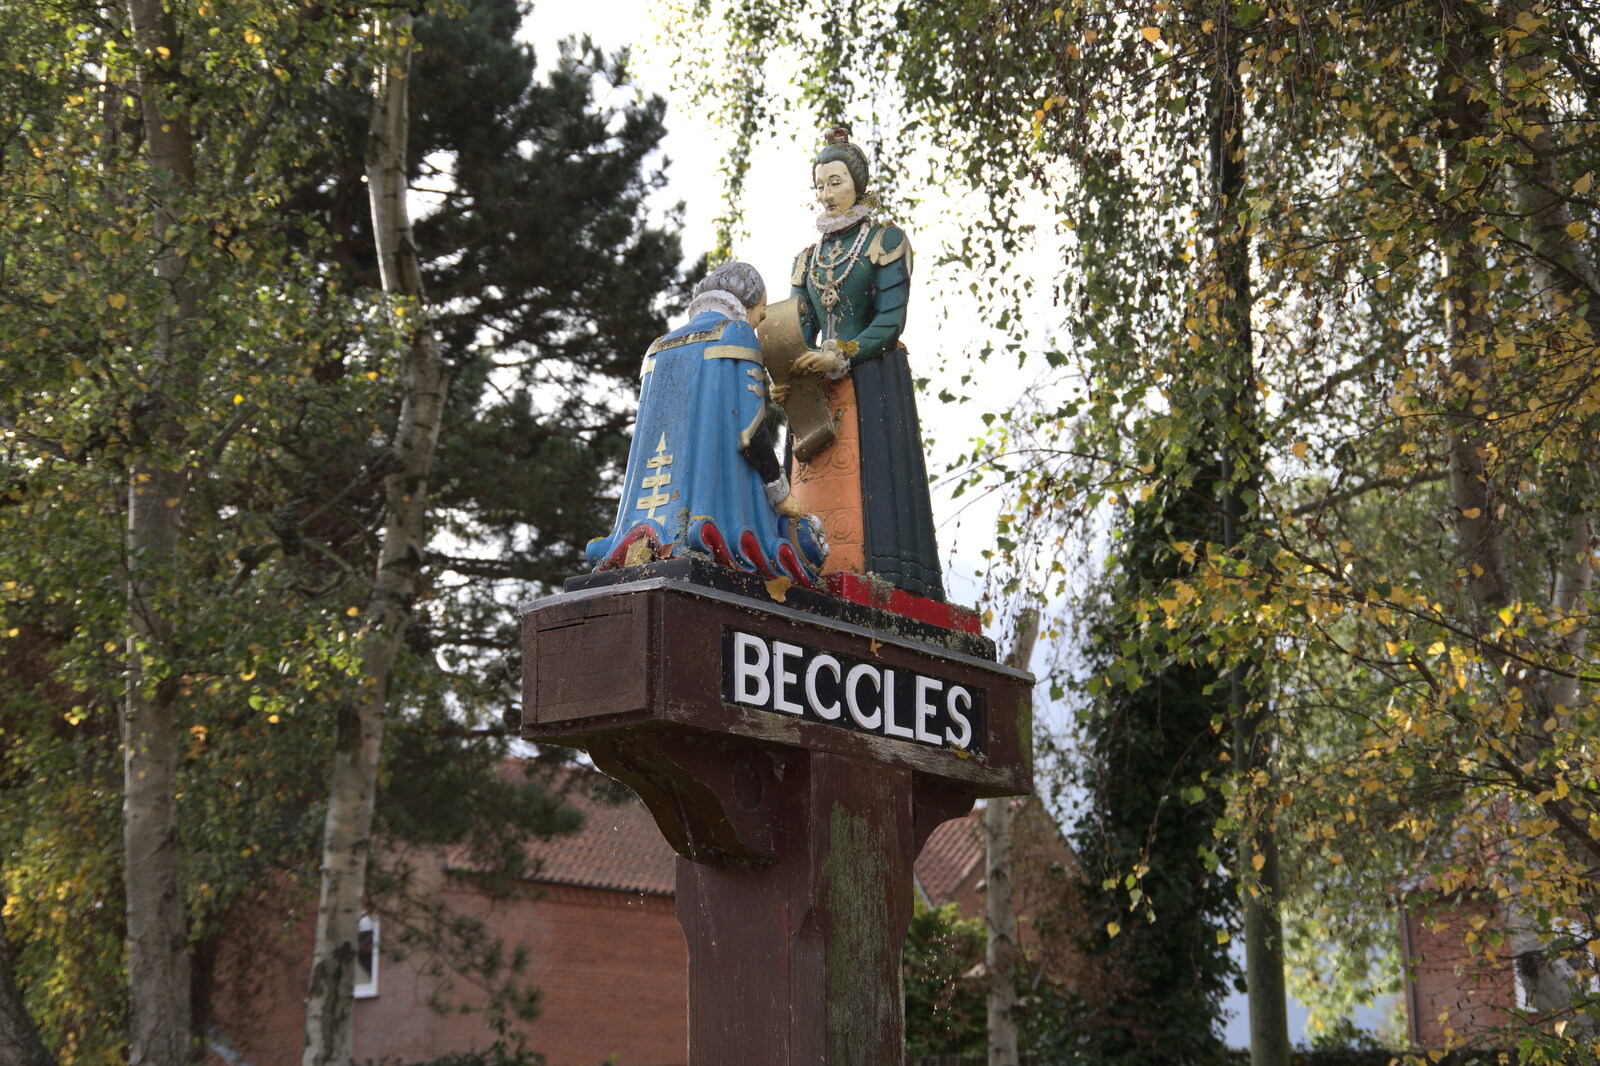 The Beccles town sign from An Afternoon in Beccles, Suffolk - 26th October 2022